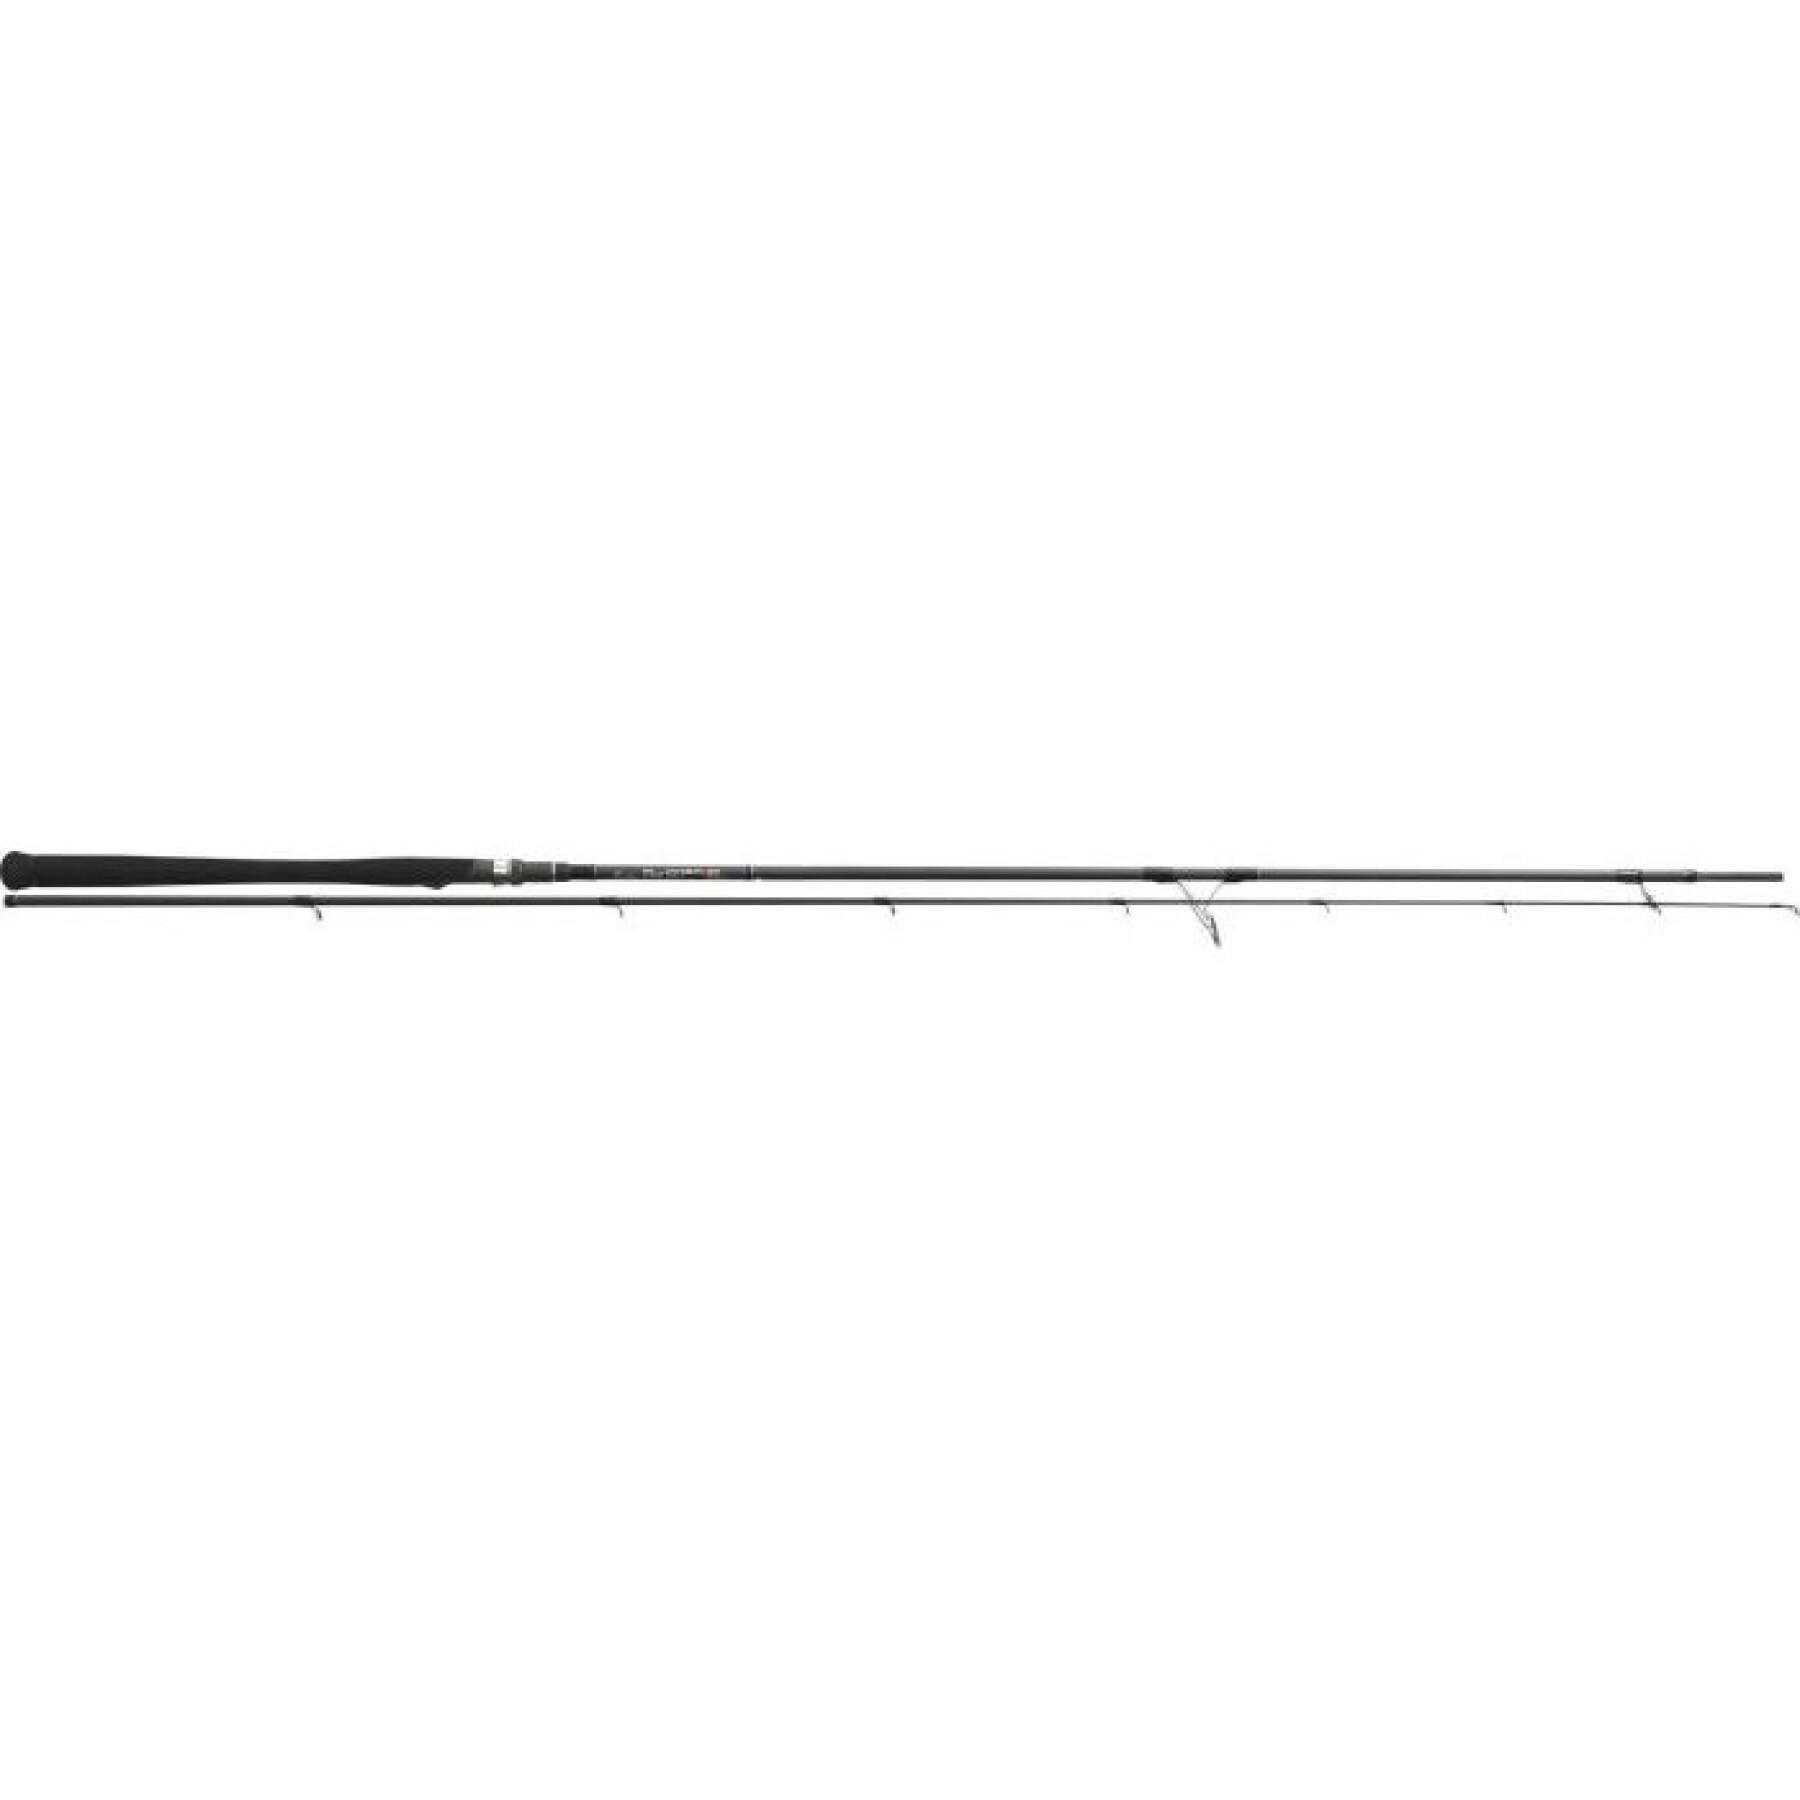 Caña de spinning Ultimate Fishing Five Sp 95 Mh 181g